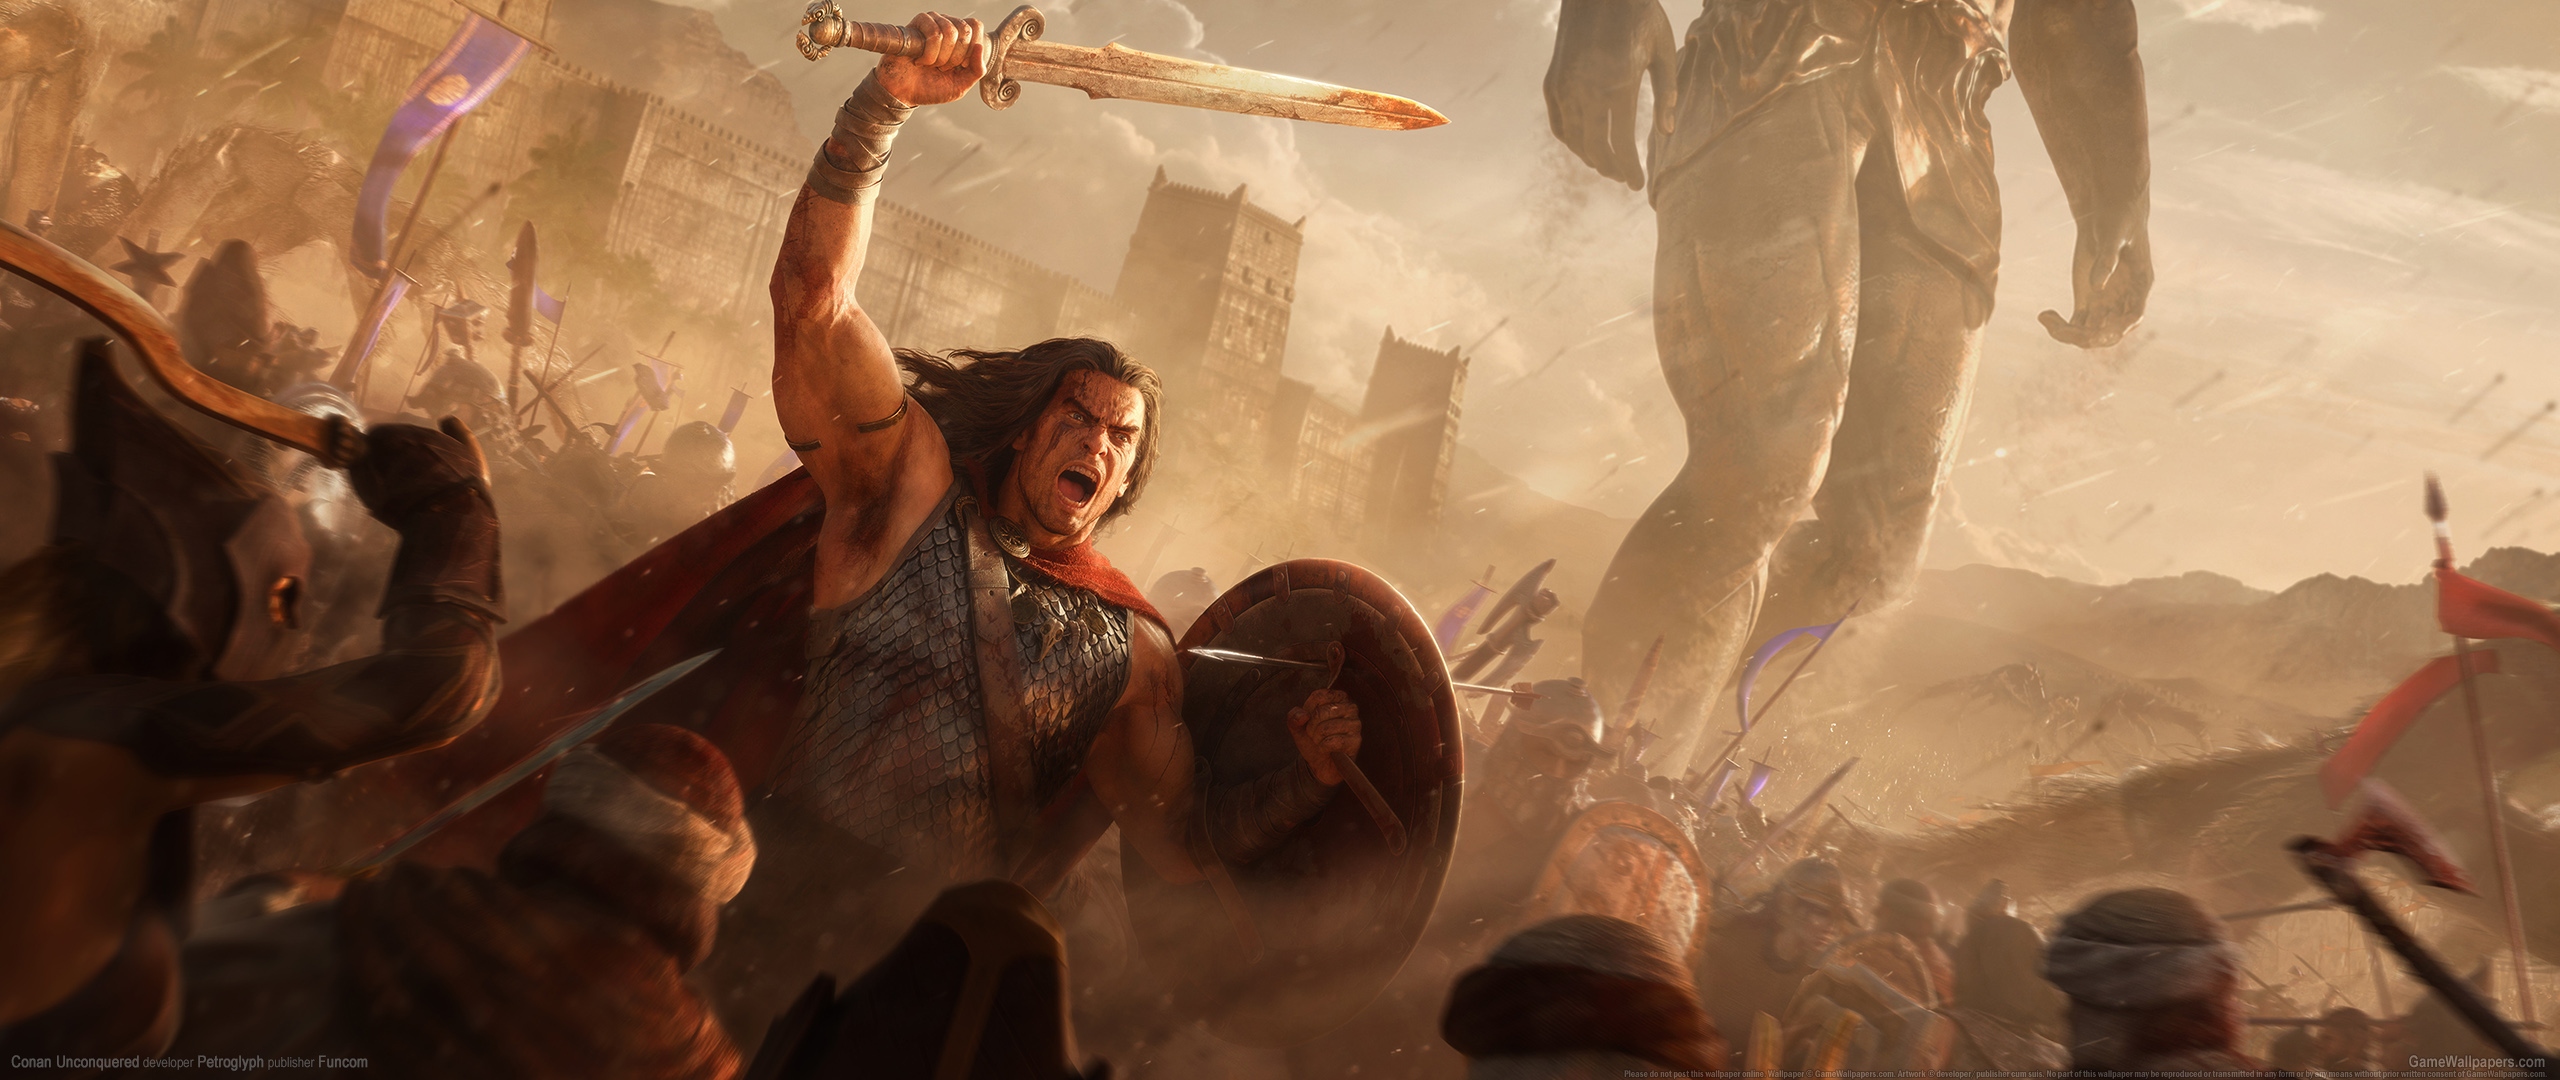 Conan Unconquered 2560x1080 wallpaper or background 01